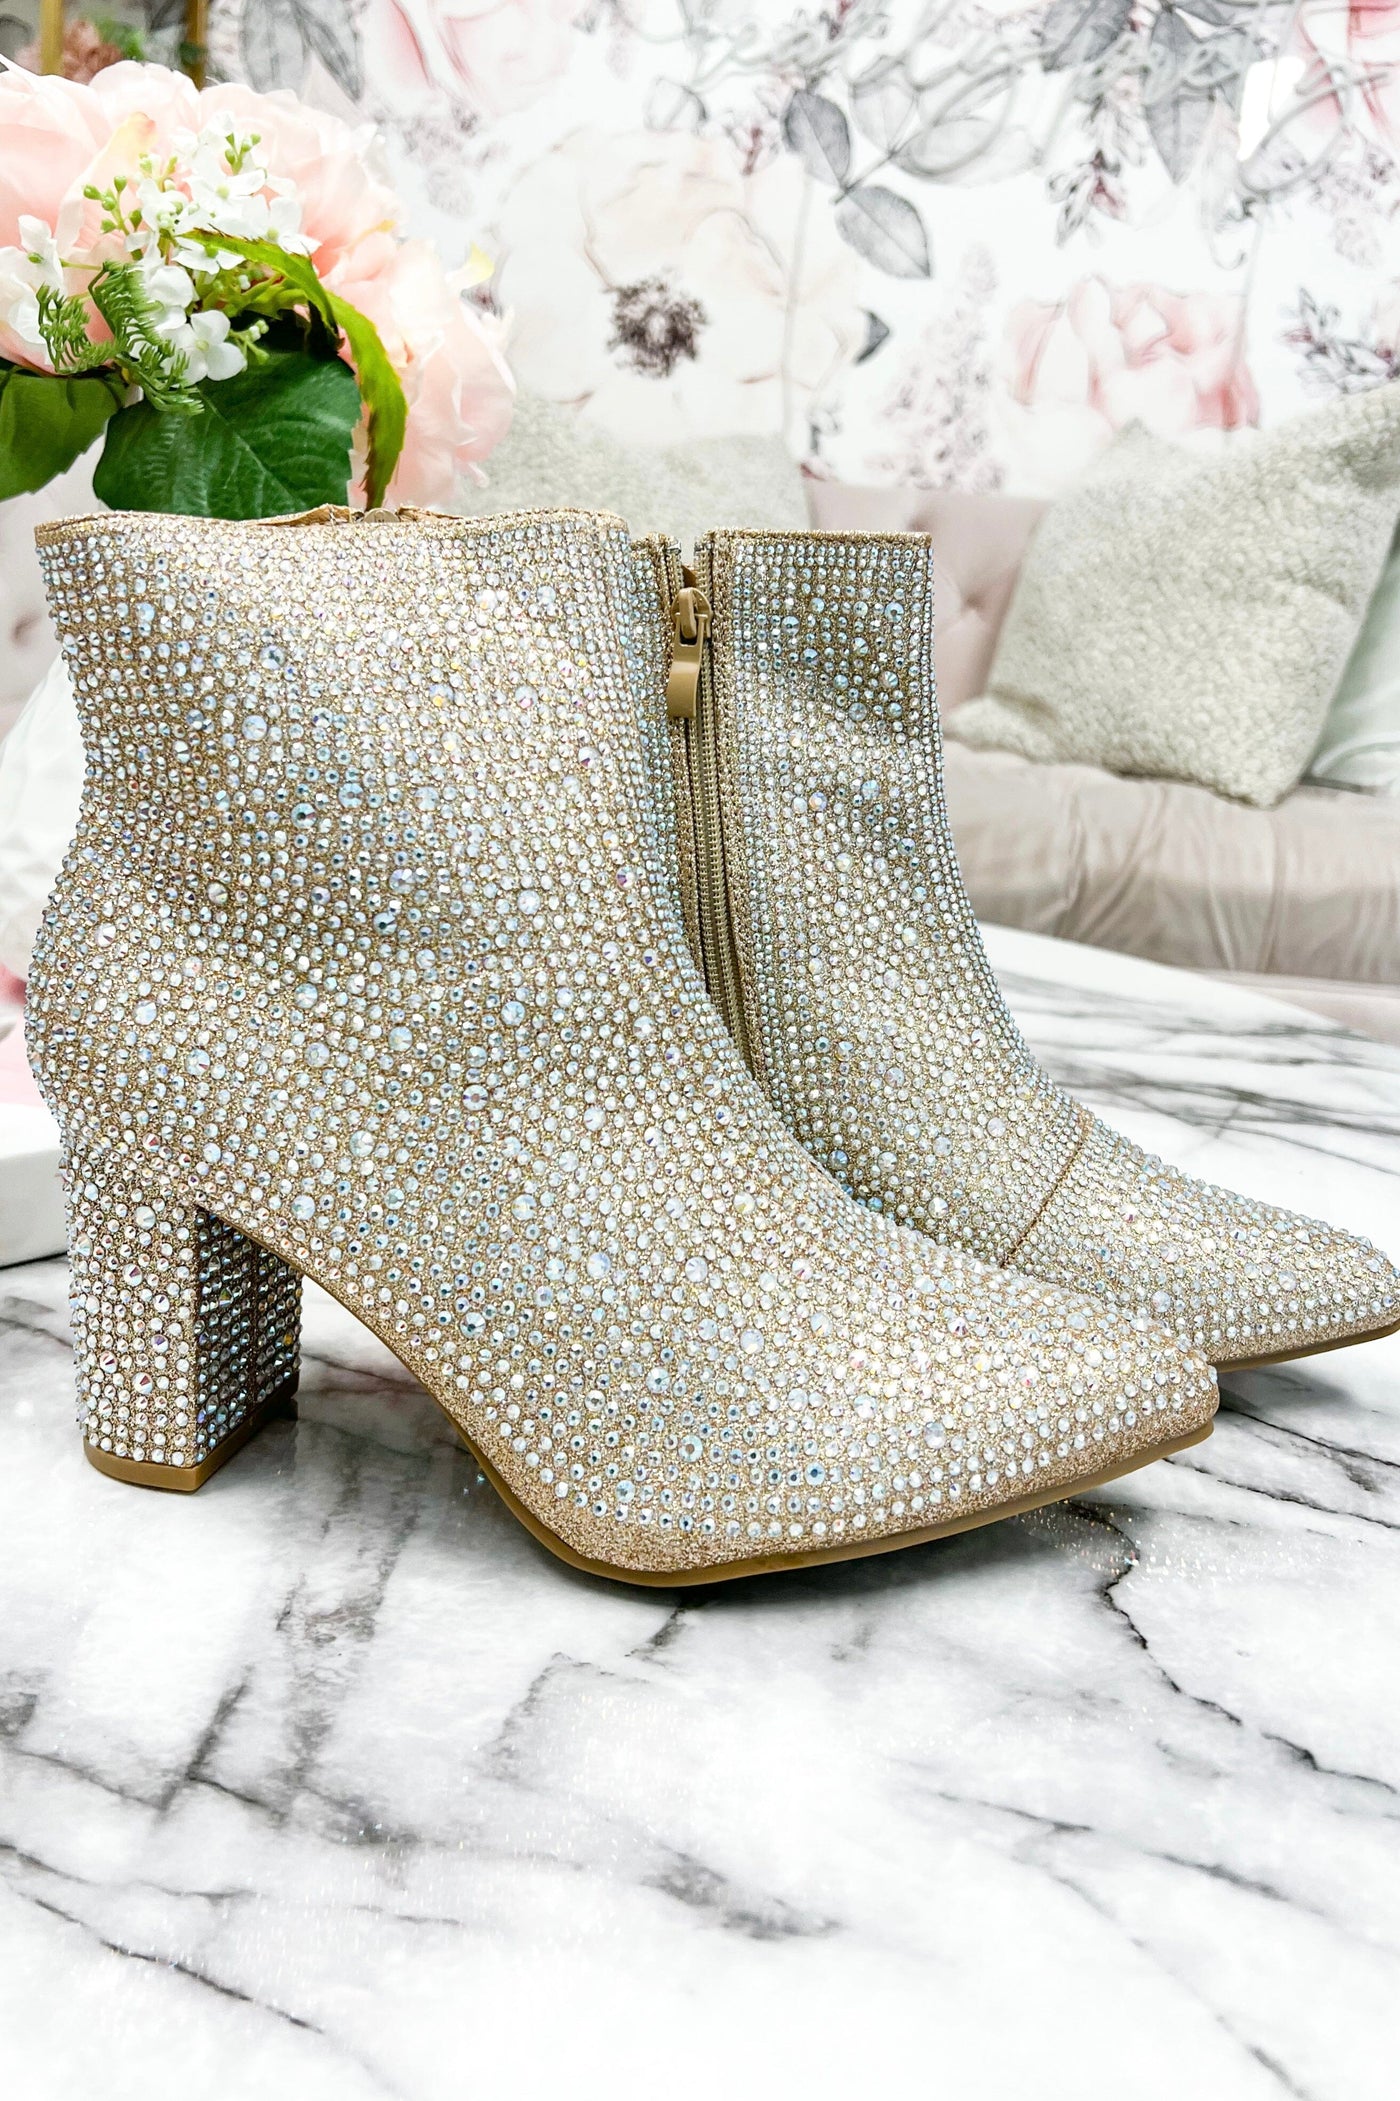 Taylor Sparkly Rhinestone Embellished Booties: Gold - Bella and Bloom Boutique